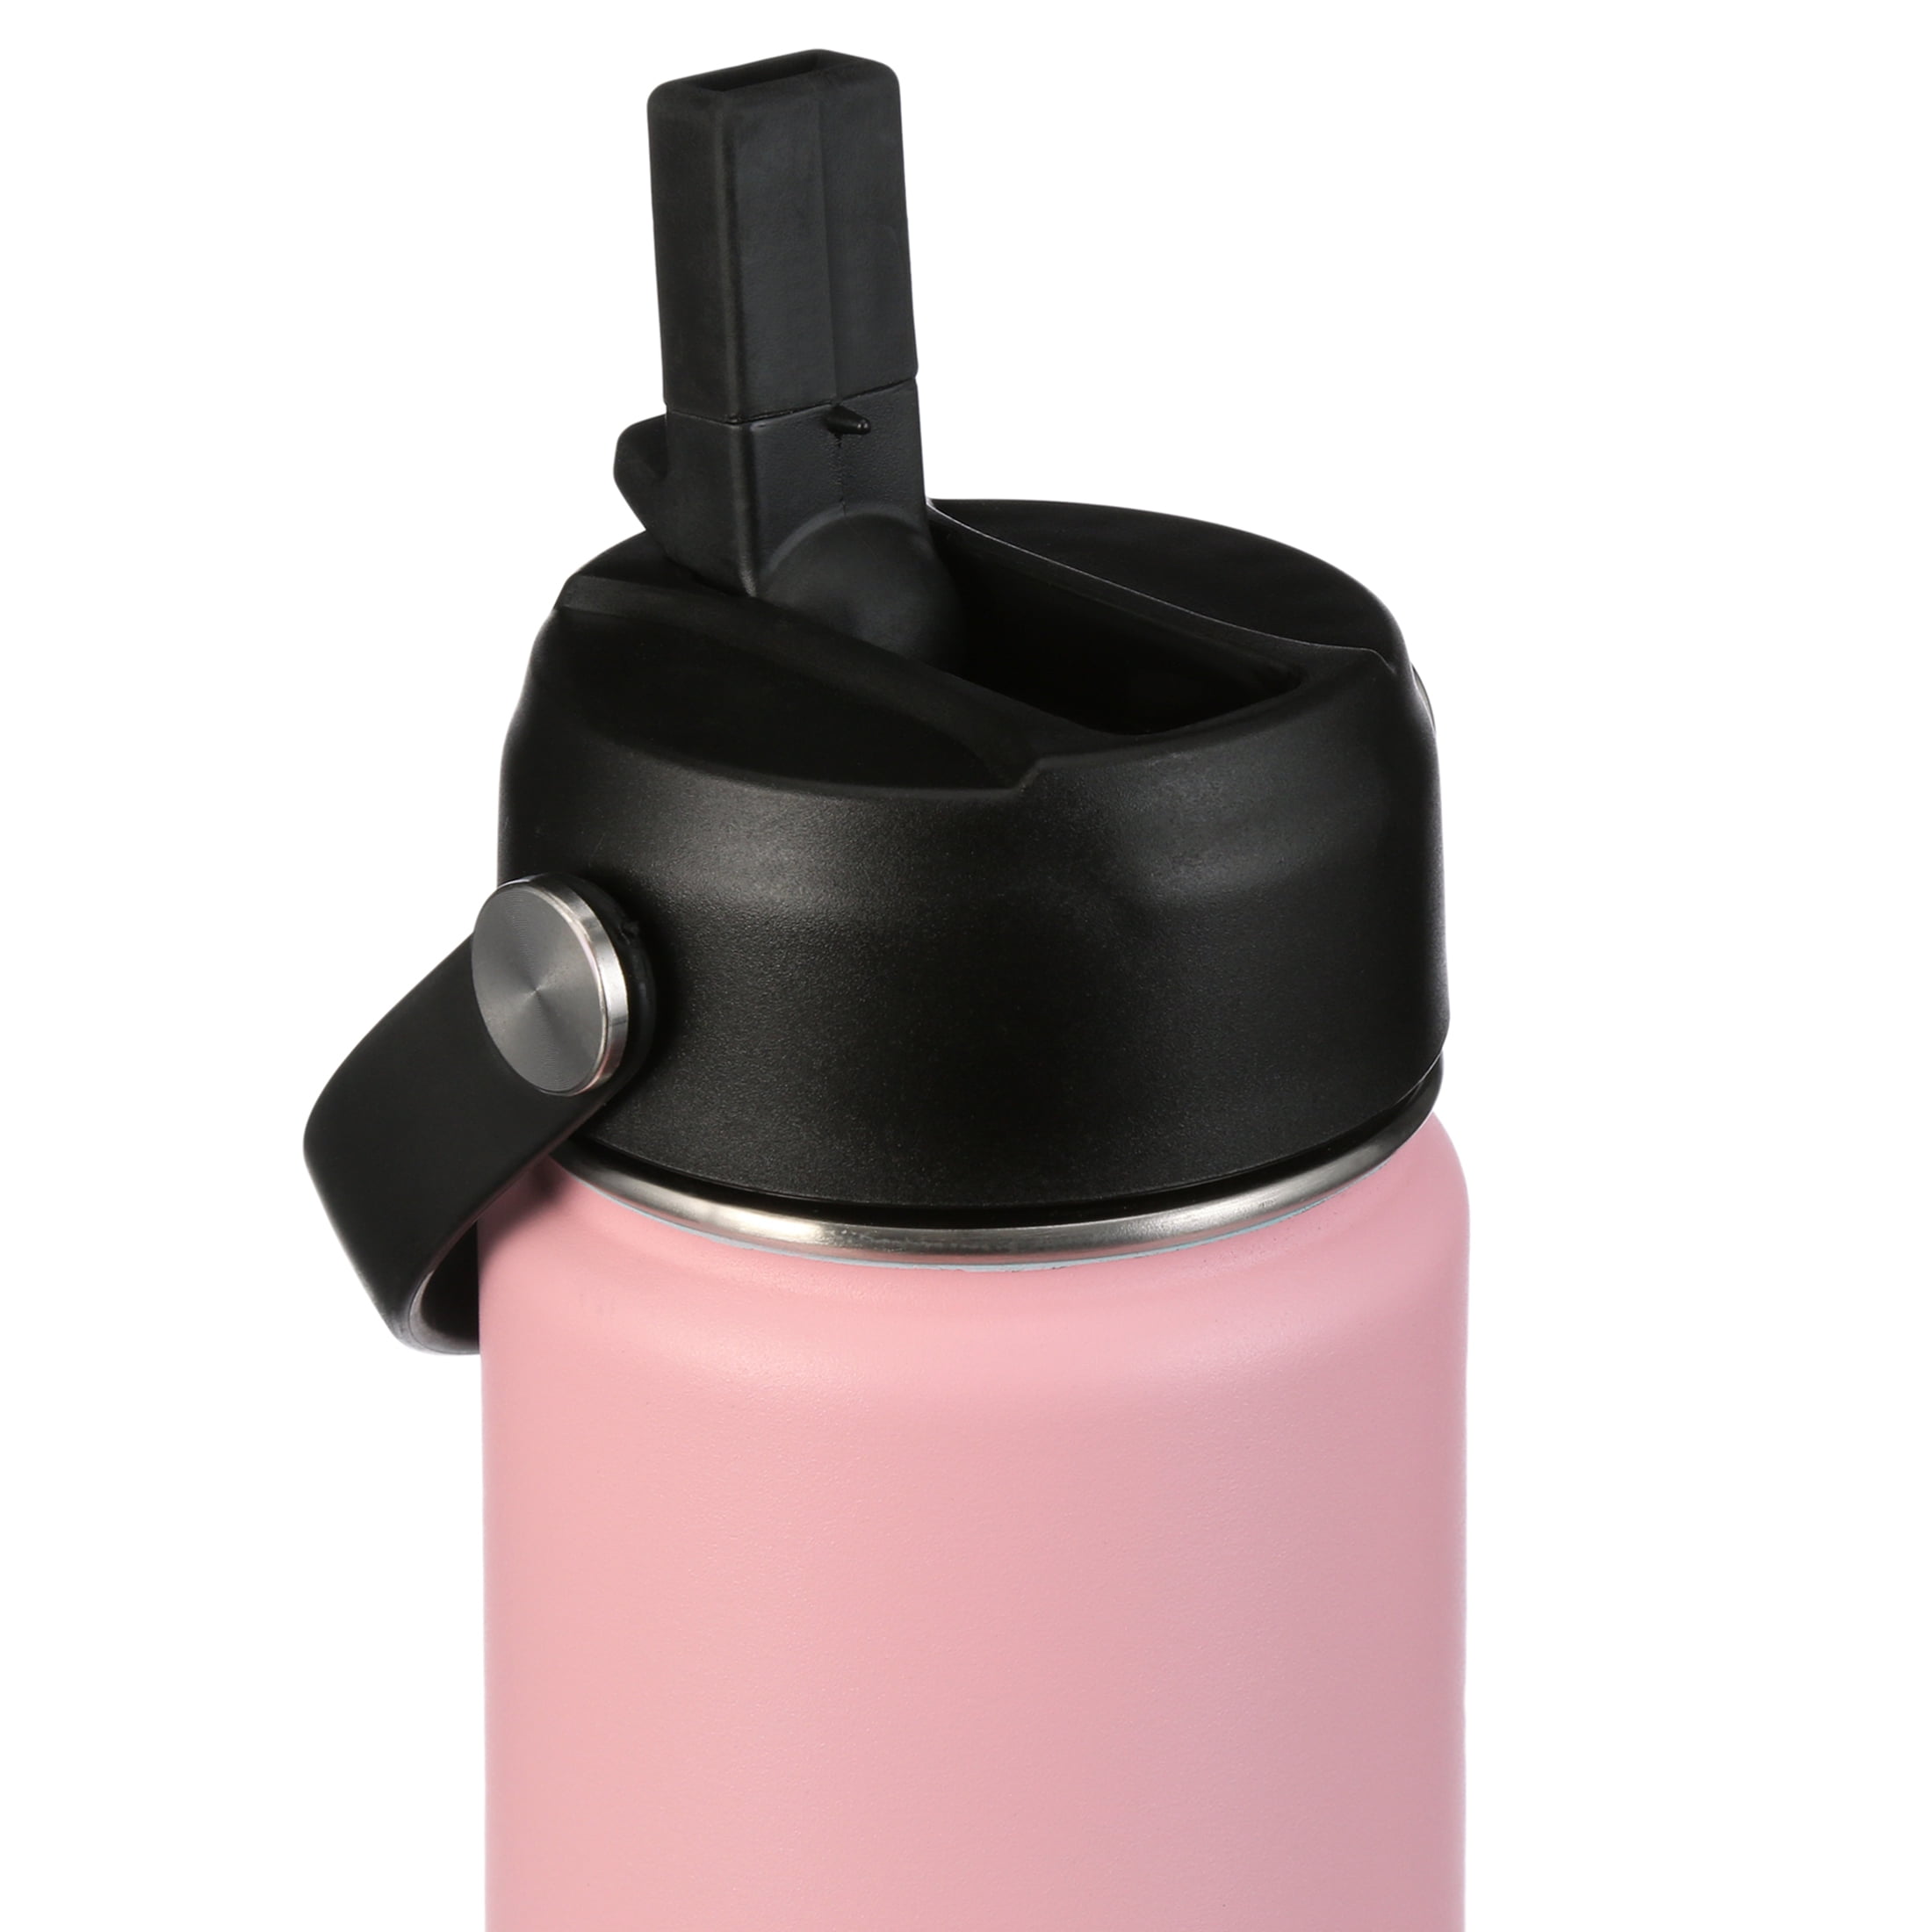 JoyJolt 32 oz. Pink Vacuum Insulated Stainless Steel Water Bottle with Flip  Lid and Sport Straw Lid JVI10203 - The Home Depot